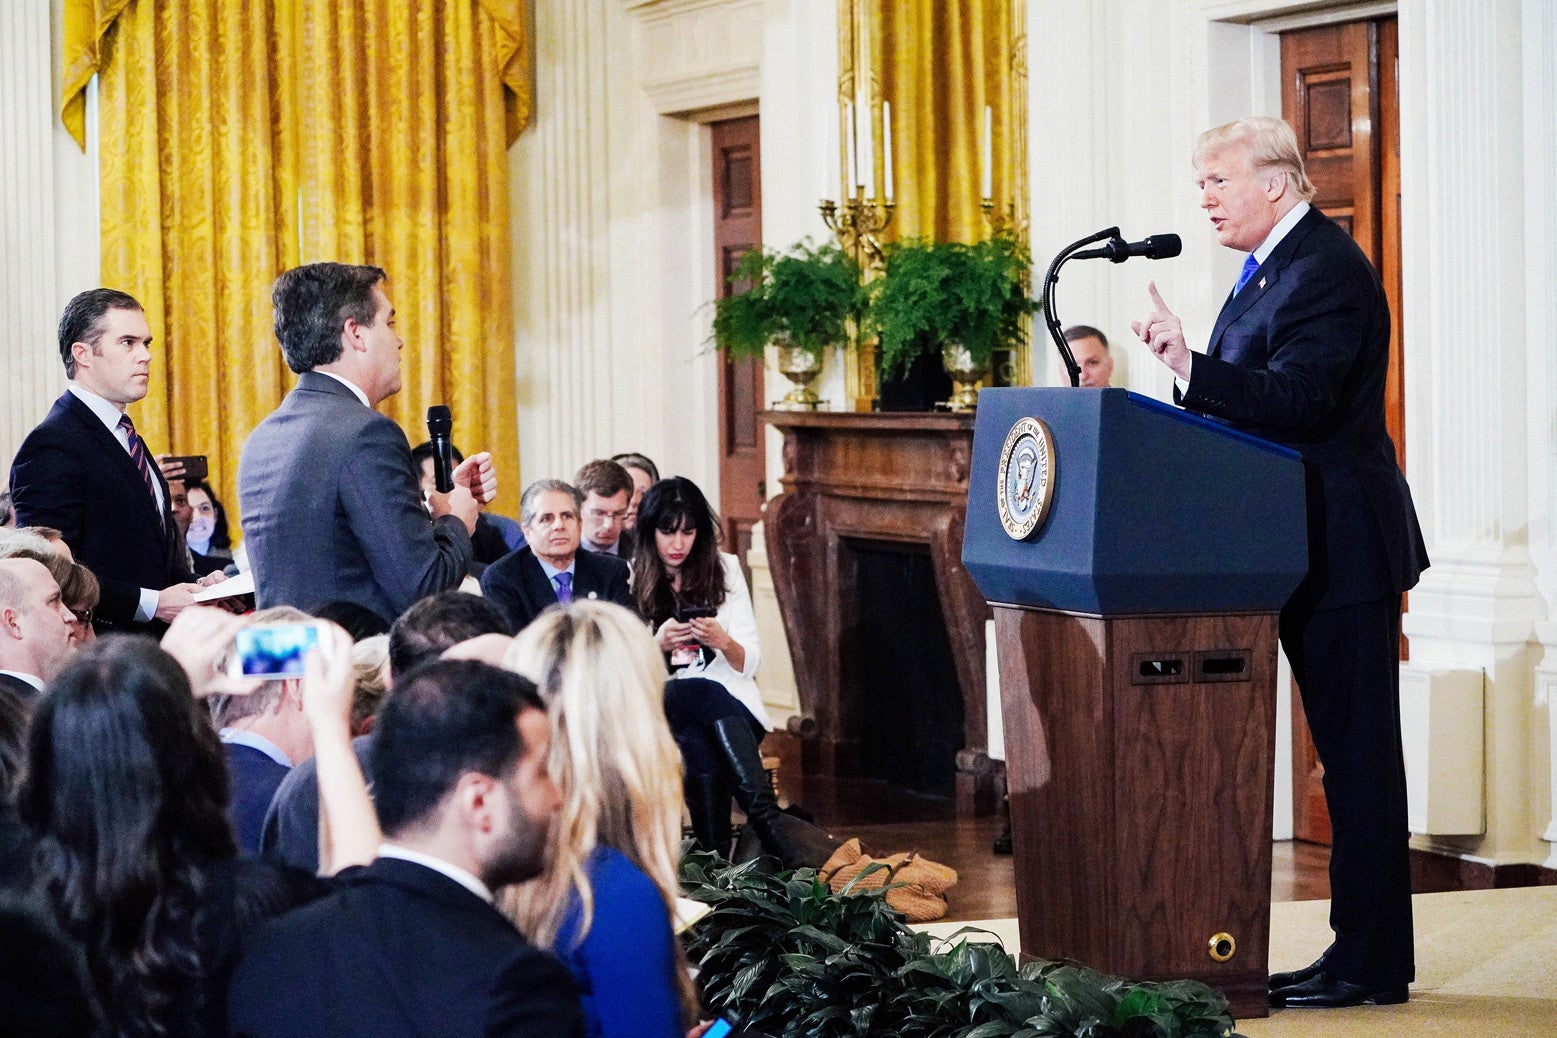 Donald Trump pointing to Jim Acosta, the CNN reporter, during a press conference in the White House.